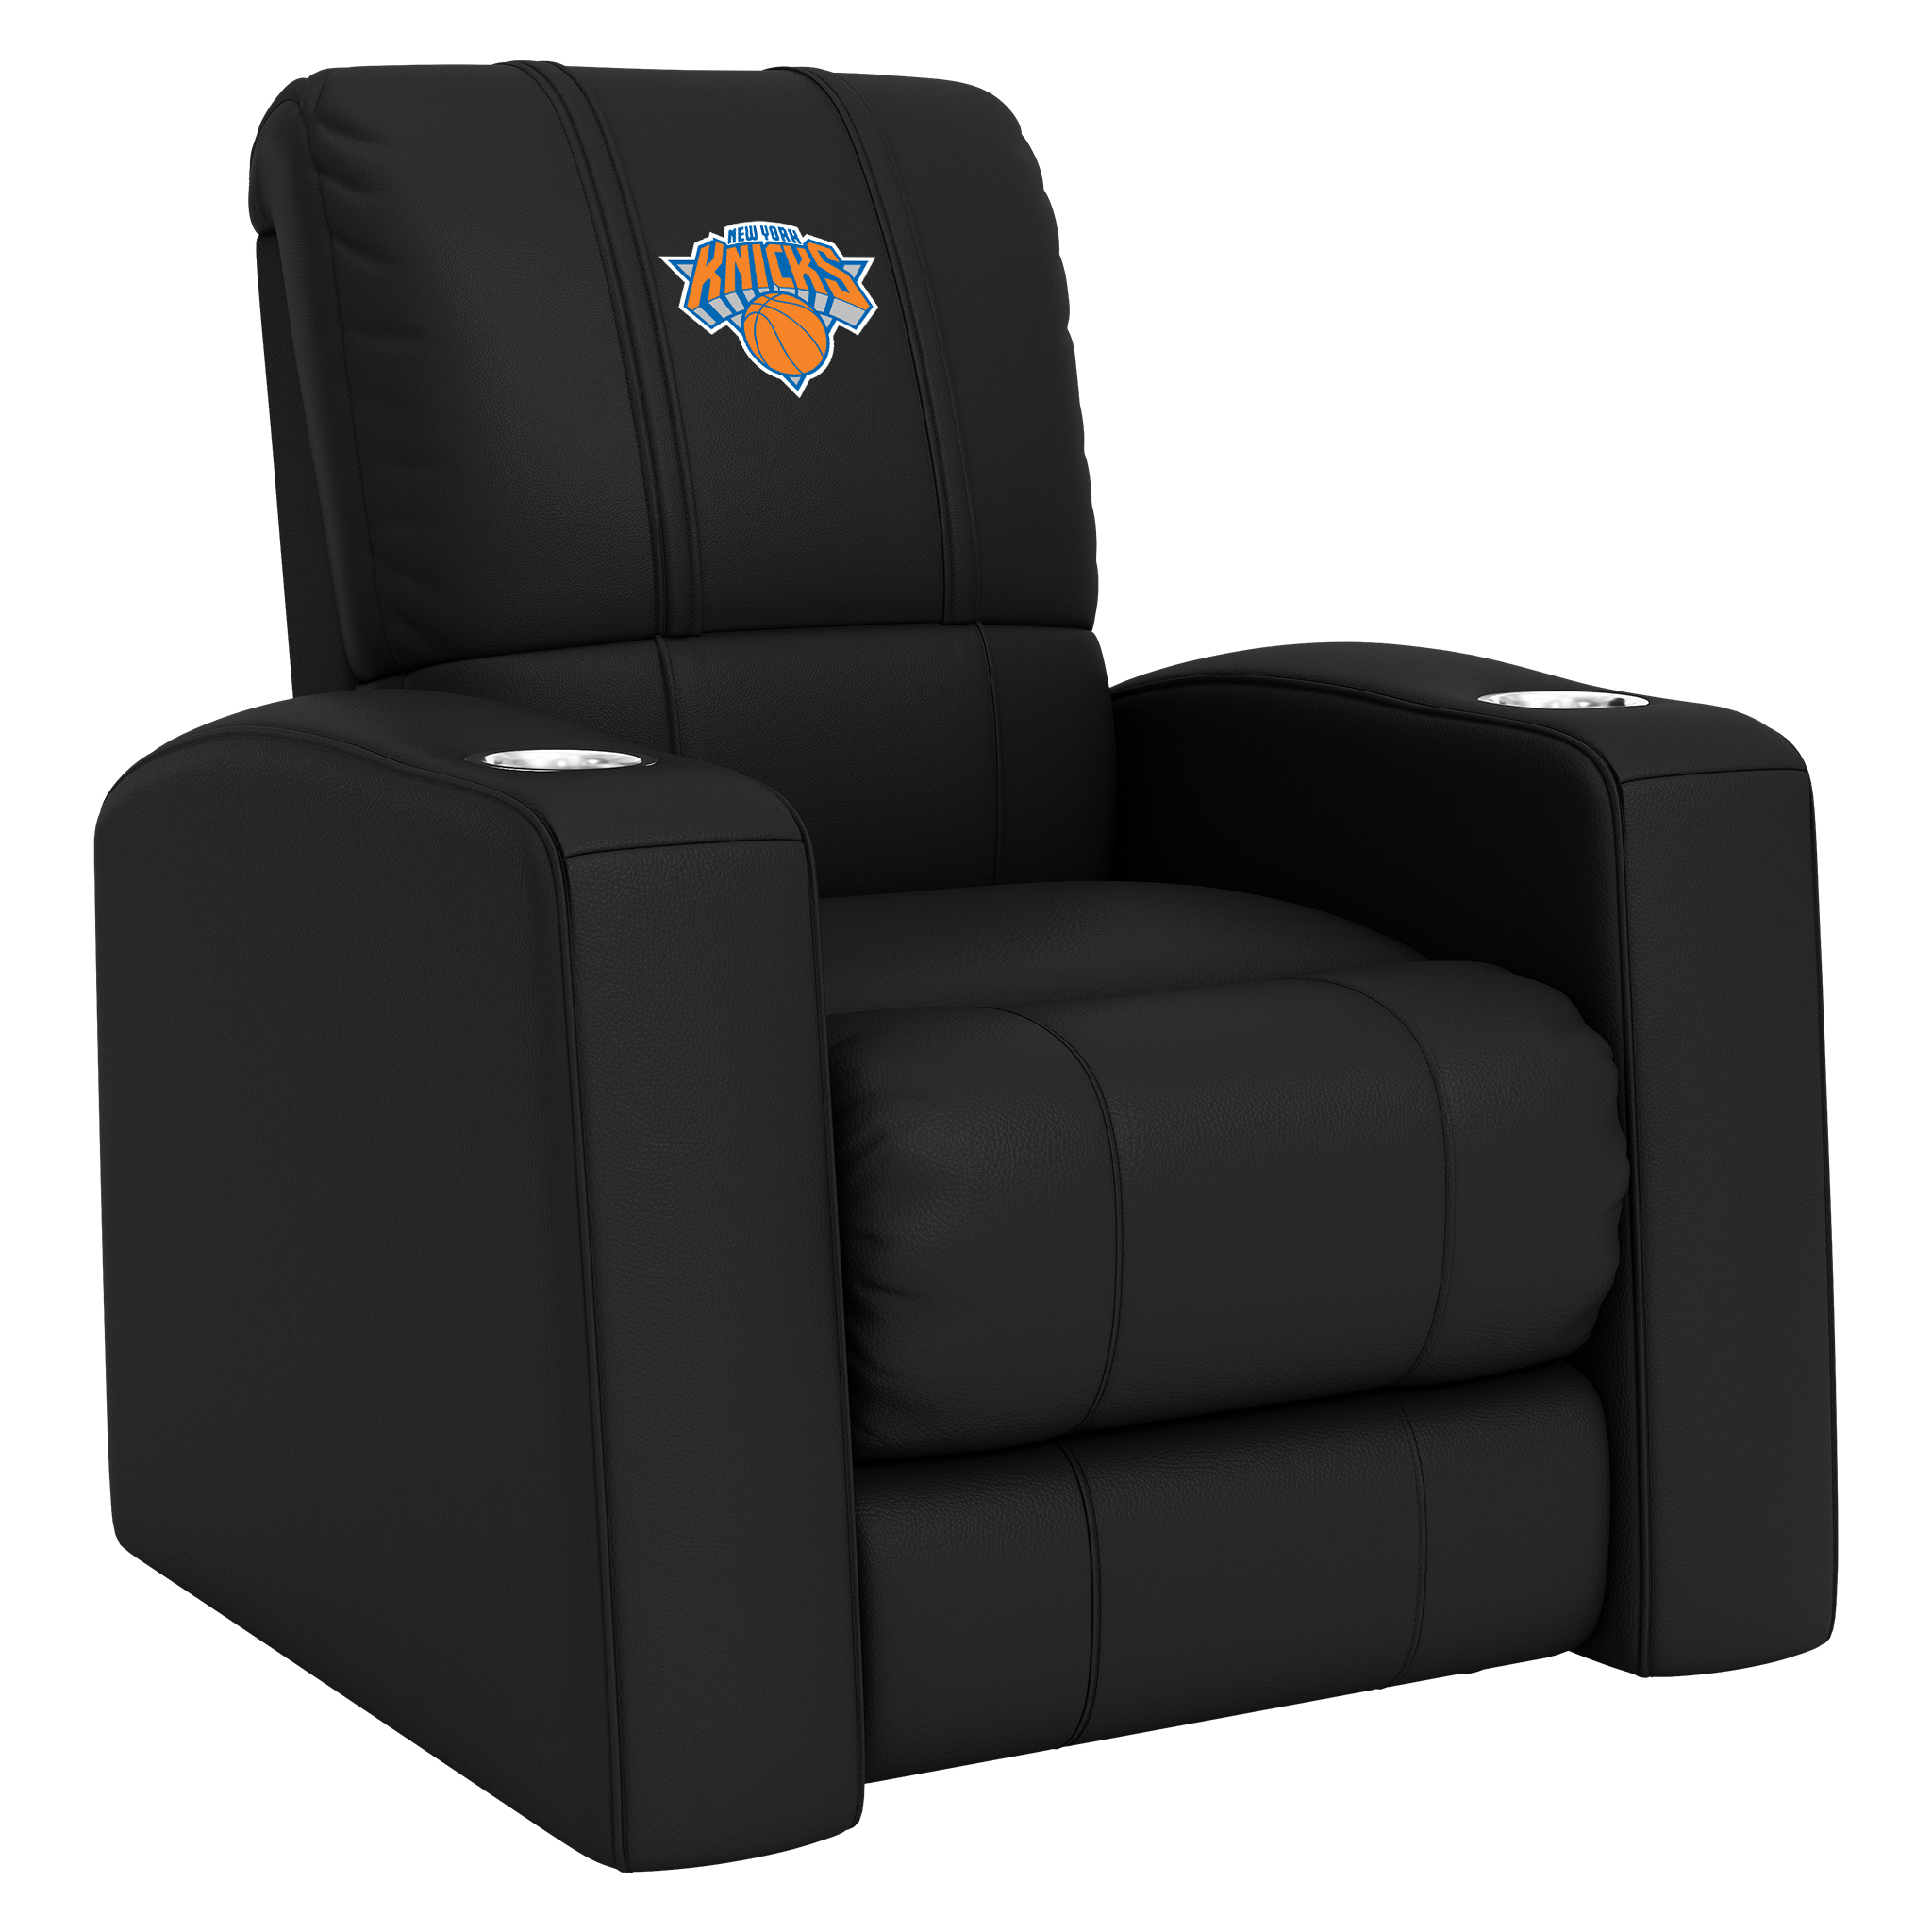 New York Knicks Home Theater Recliner with New York Knicks Logo